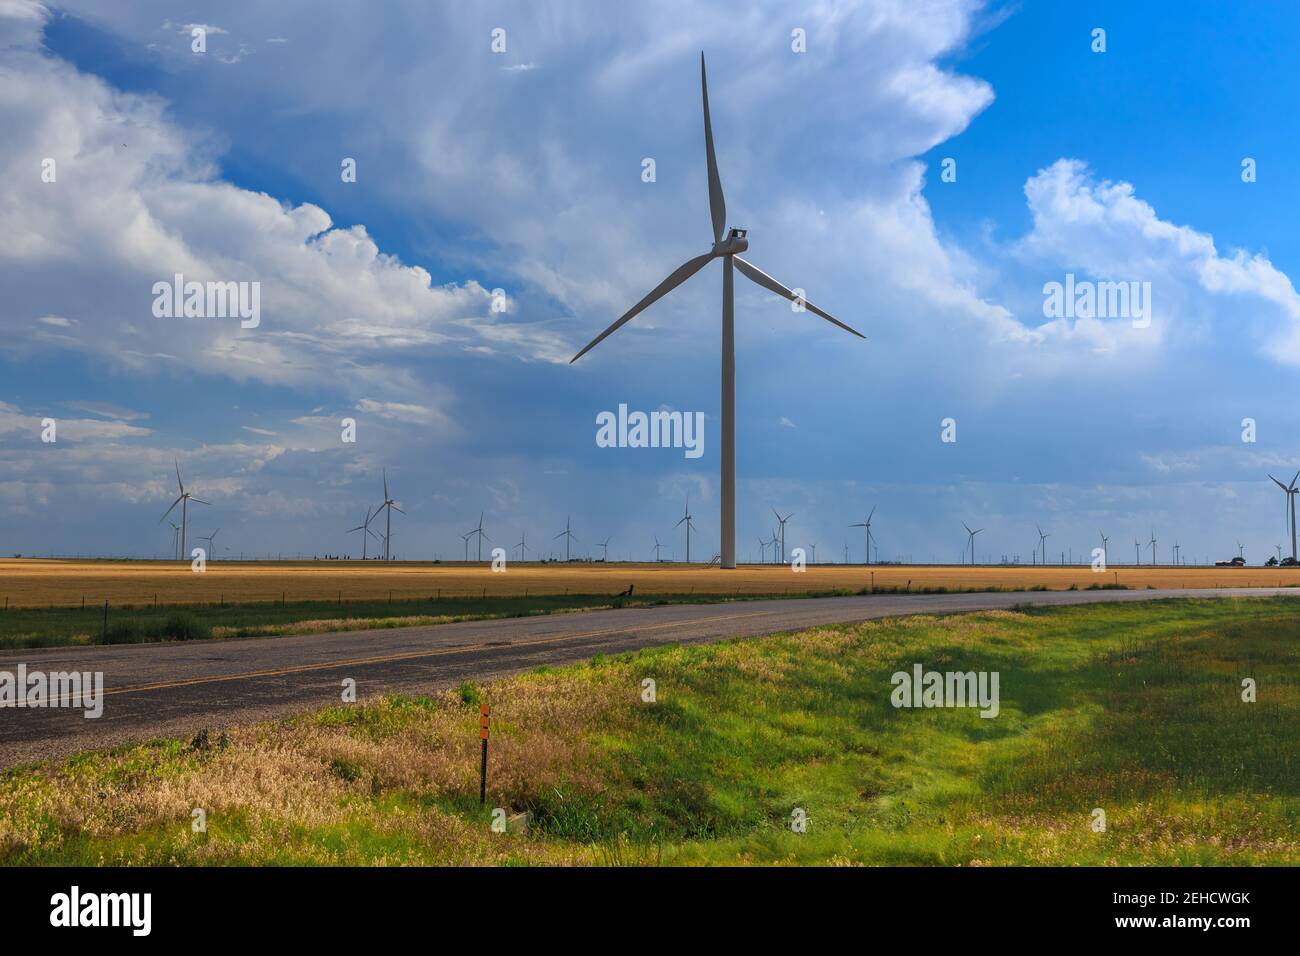 Wind Farm, Clarendon Texas, south of Interstate 40 Route 70 Gray County Texas. Late afternoon sun with cloudy sky in background. Stock Photo